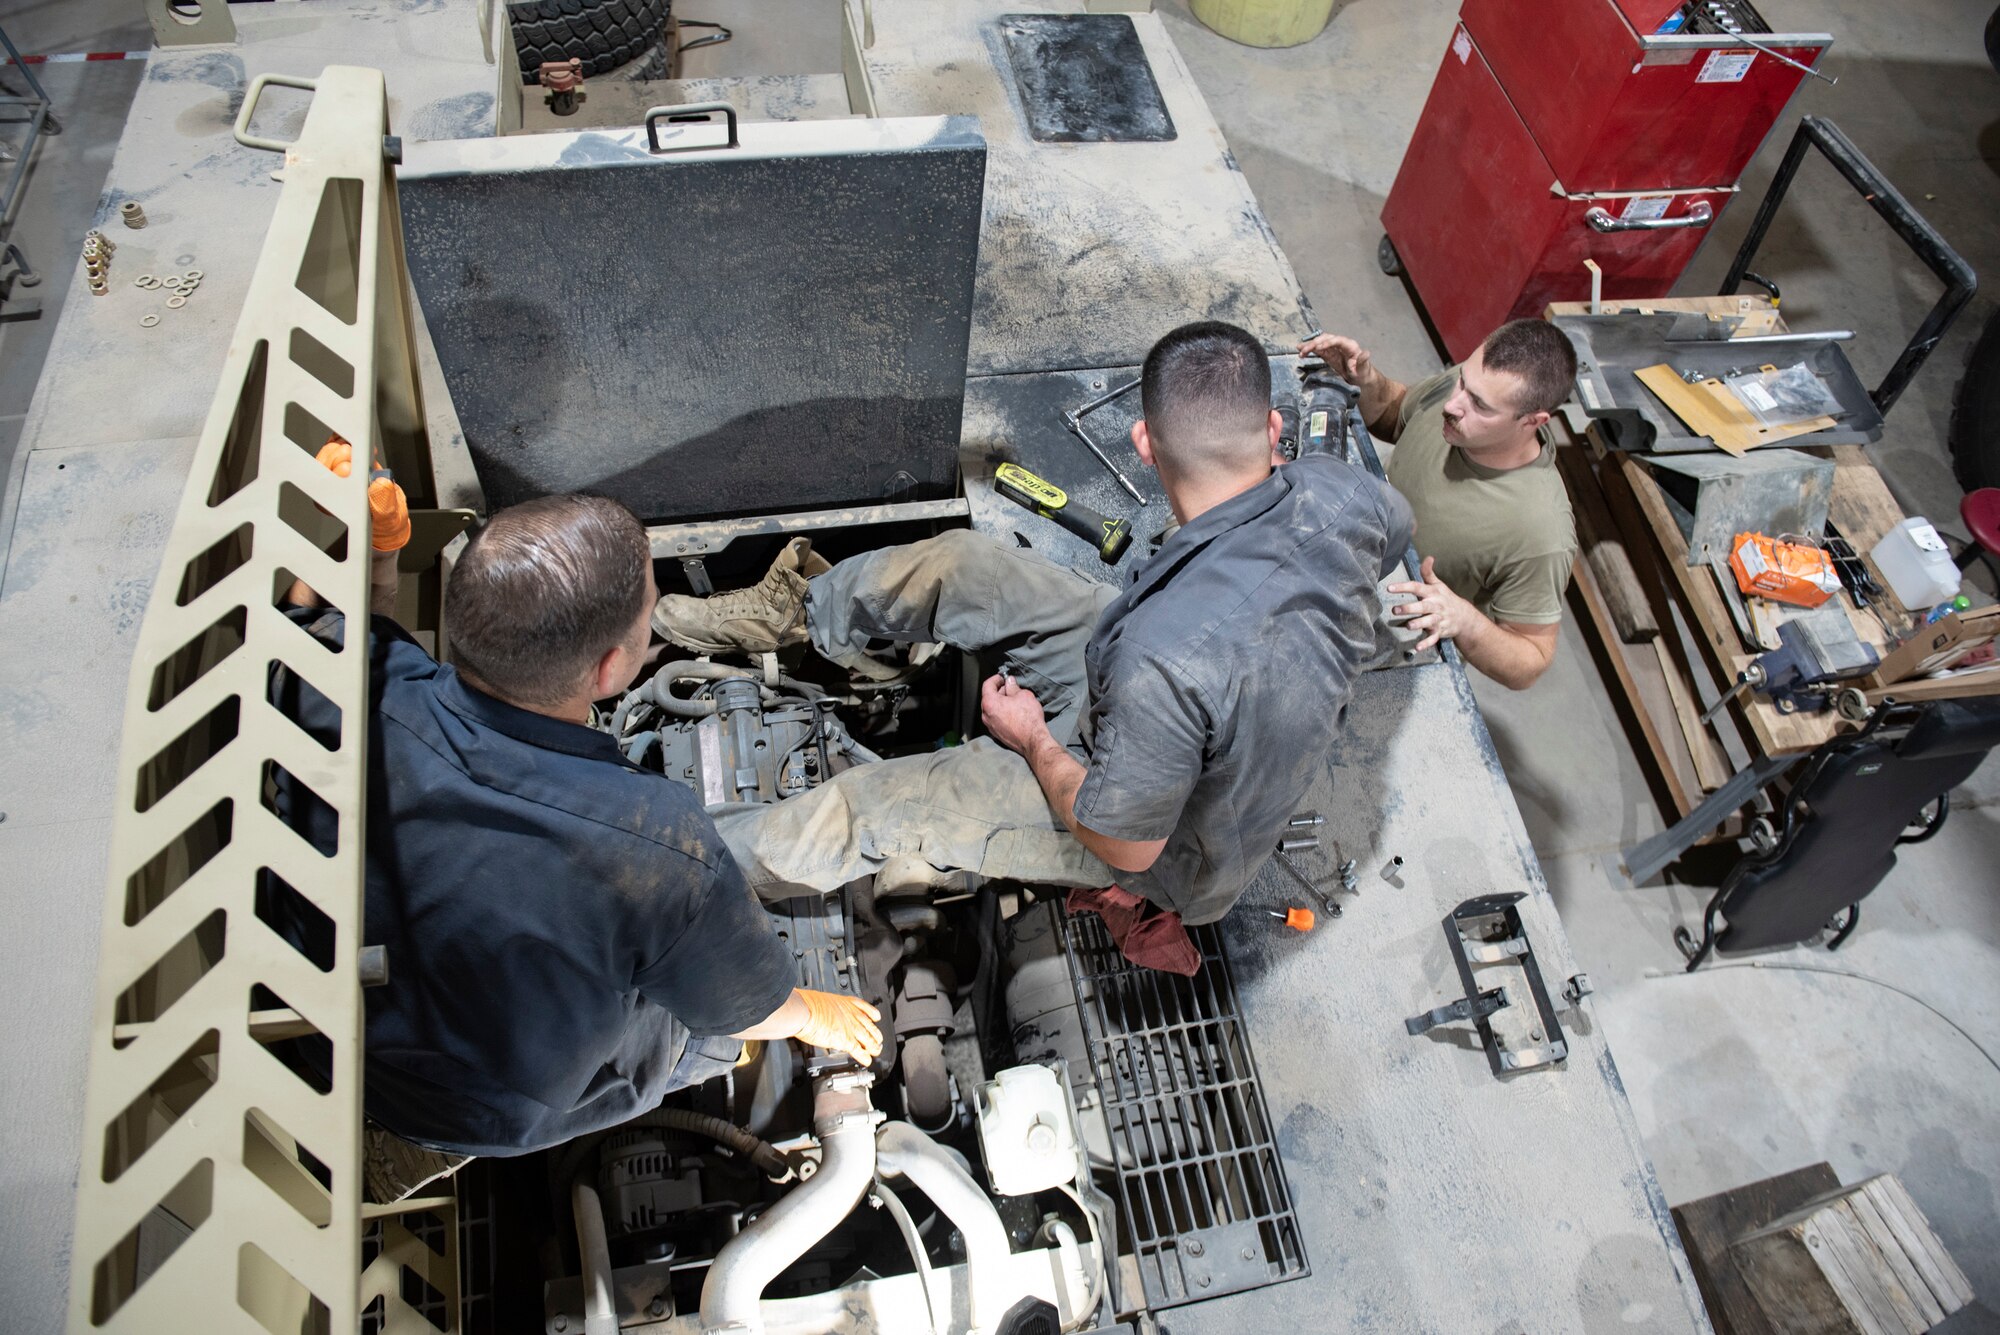 U.S. Air Force Staff Sgt. Douglas Johnson, (left) a vehicle maintainer assigned to the 386th Expeditionary Logistics Readiness Squadron, helps U.S. Air Force Staff Sgt. Brice Thompson, (right) a vehicle maintainer assigned to the 386th Expeditionary Logistics Readiness Squadron, change a starter in a MV-2 toe tractor at Ali Al Salem Air Base, Kuwait, July 8, 2021.